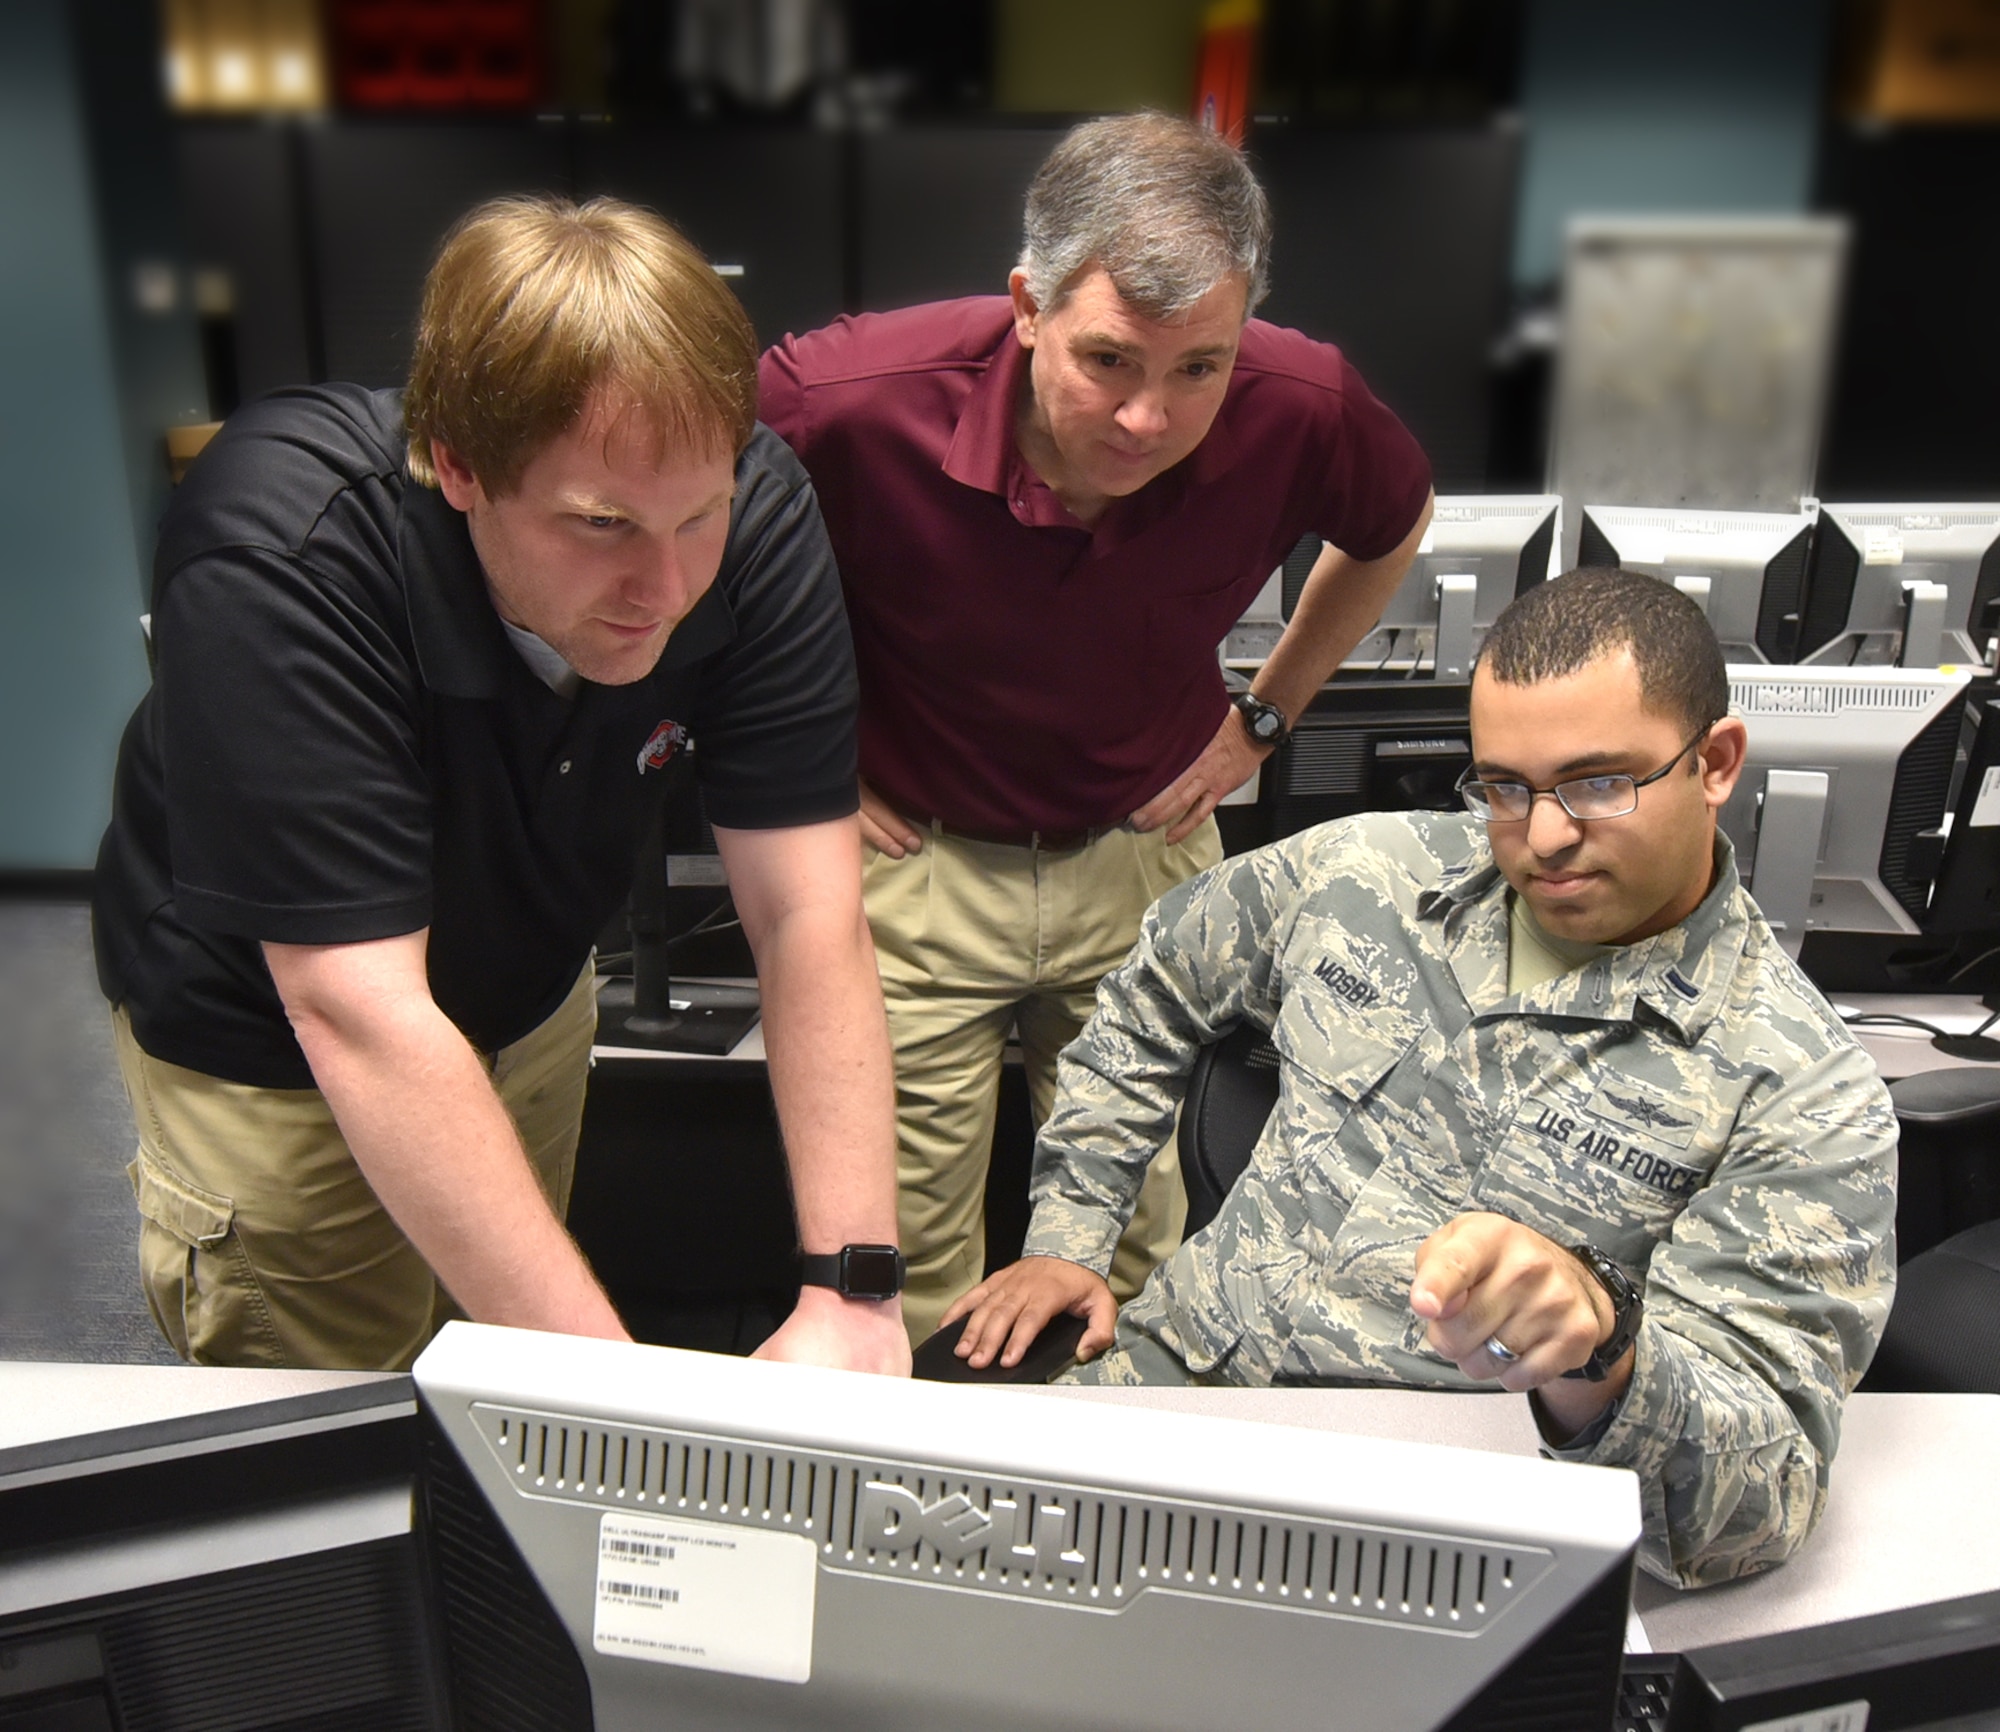 (From the left) Ryan Harris, Air Force Institute of Technology computer system administrator and Barry Mullins, AFIT computer engineering professor, observe 1st Lt. Joshua Mosby, AFIT student, as he explains his computer systems hacking technique during the cyberattack class at Wright-Patterson Air Force Base, Ohio, Feb. 20, 2018. Counter insurgency hacking is an espionage attack weapon used to deter enemy threats to national computer communication systems. (U.S. Air Force Photo by Al Bright/Released)